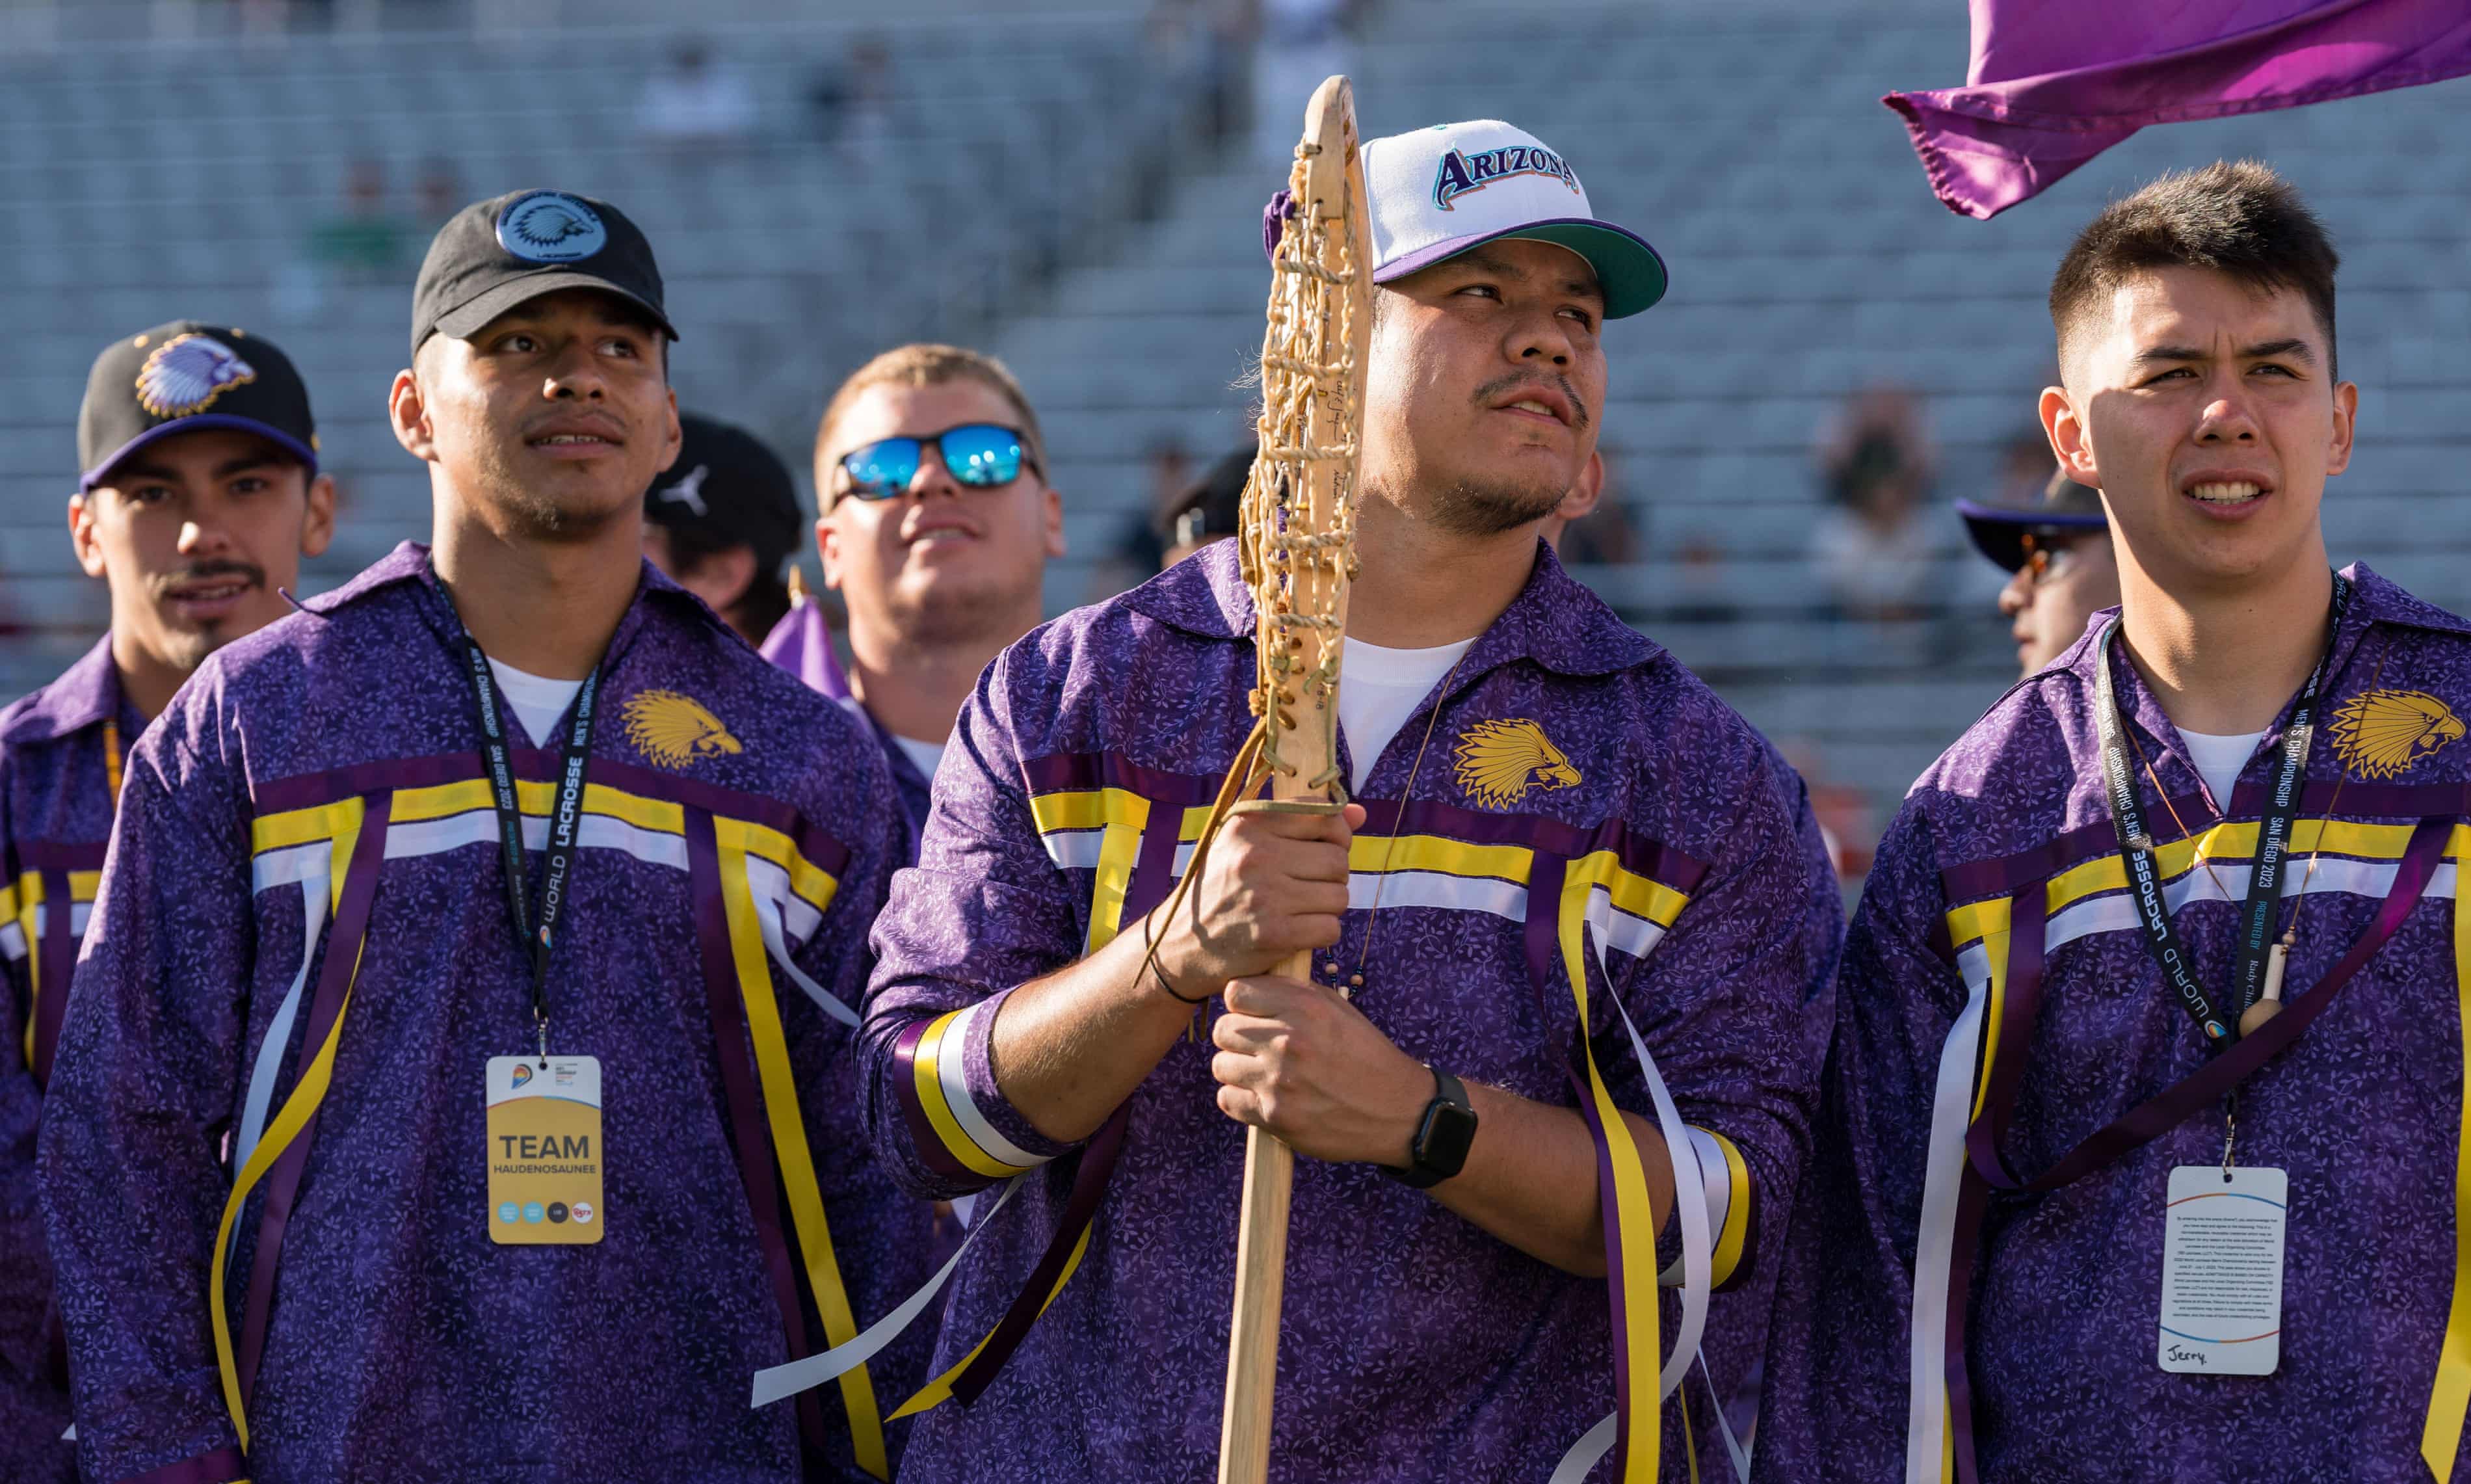 The Haudenosaunee Nationals’ quest to play under their own flag at the Olympics (theguardian.com)